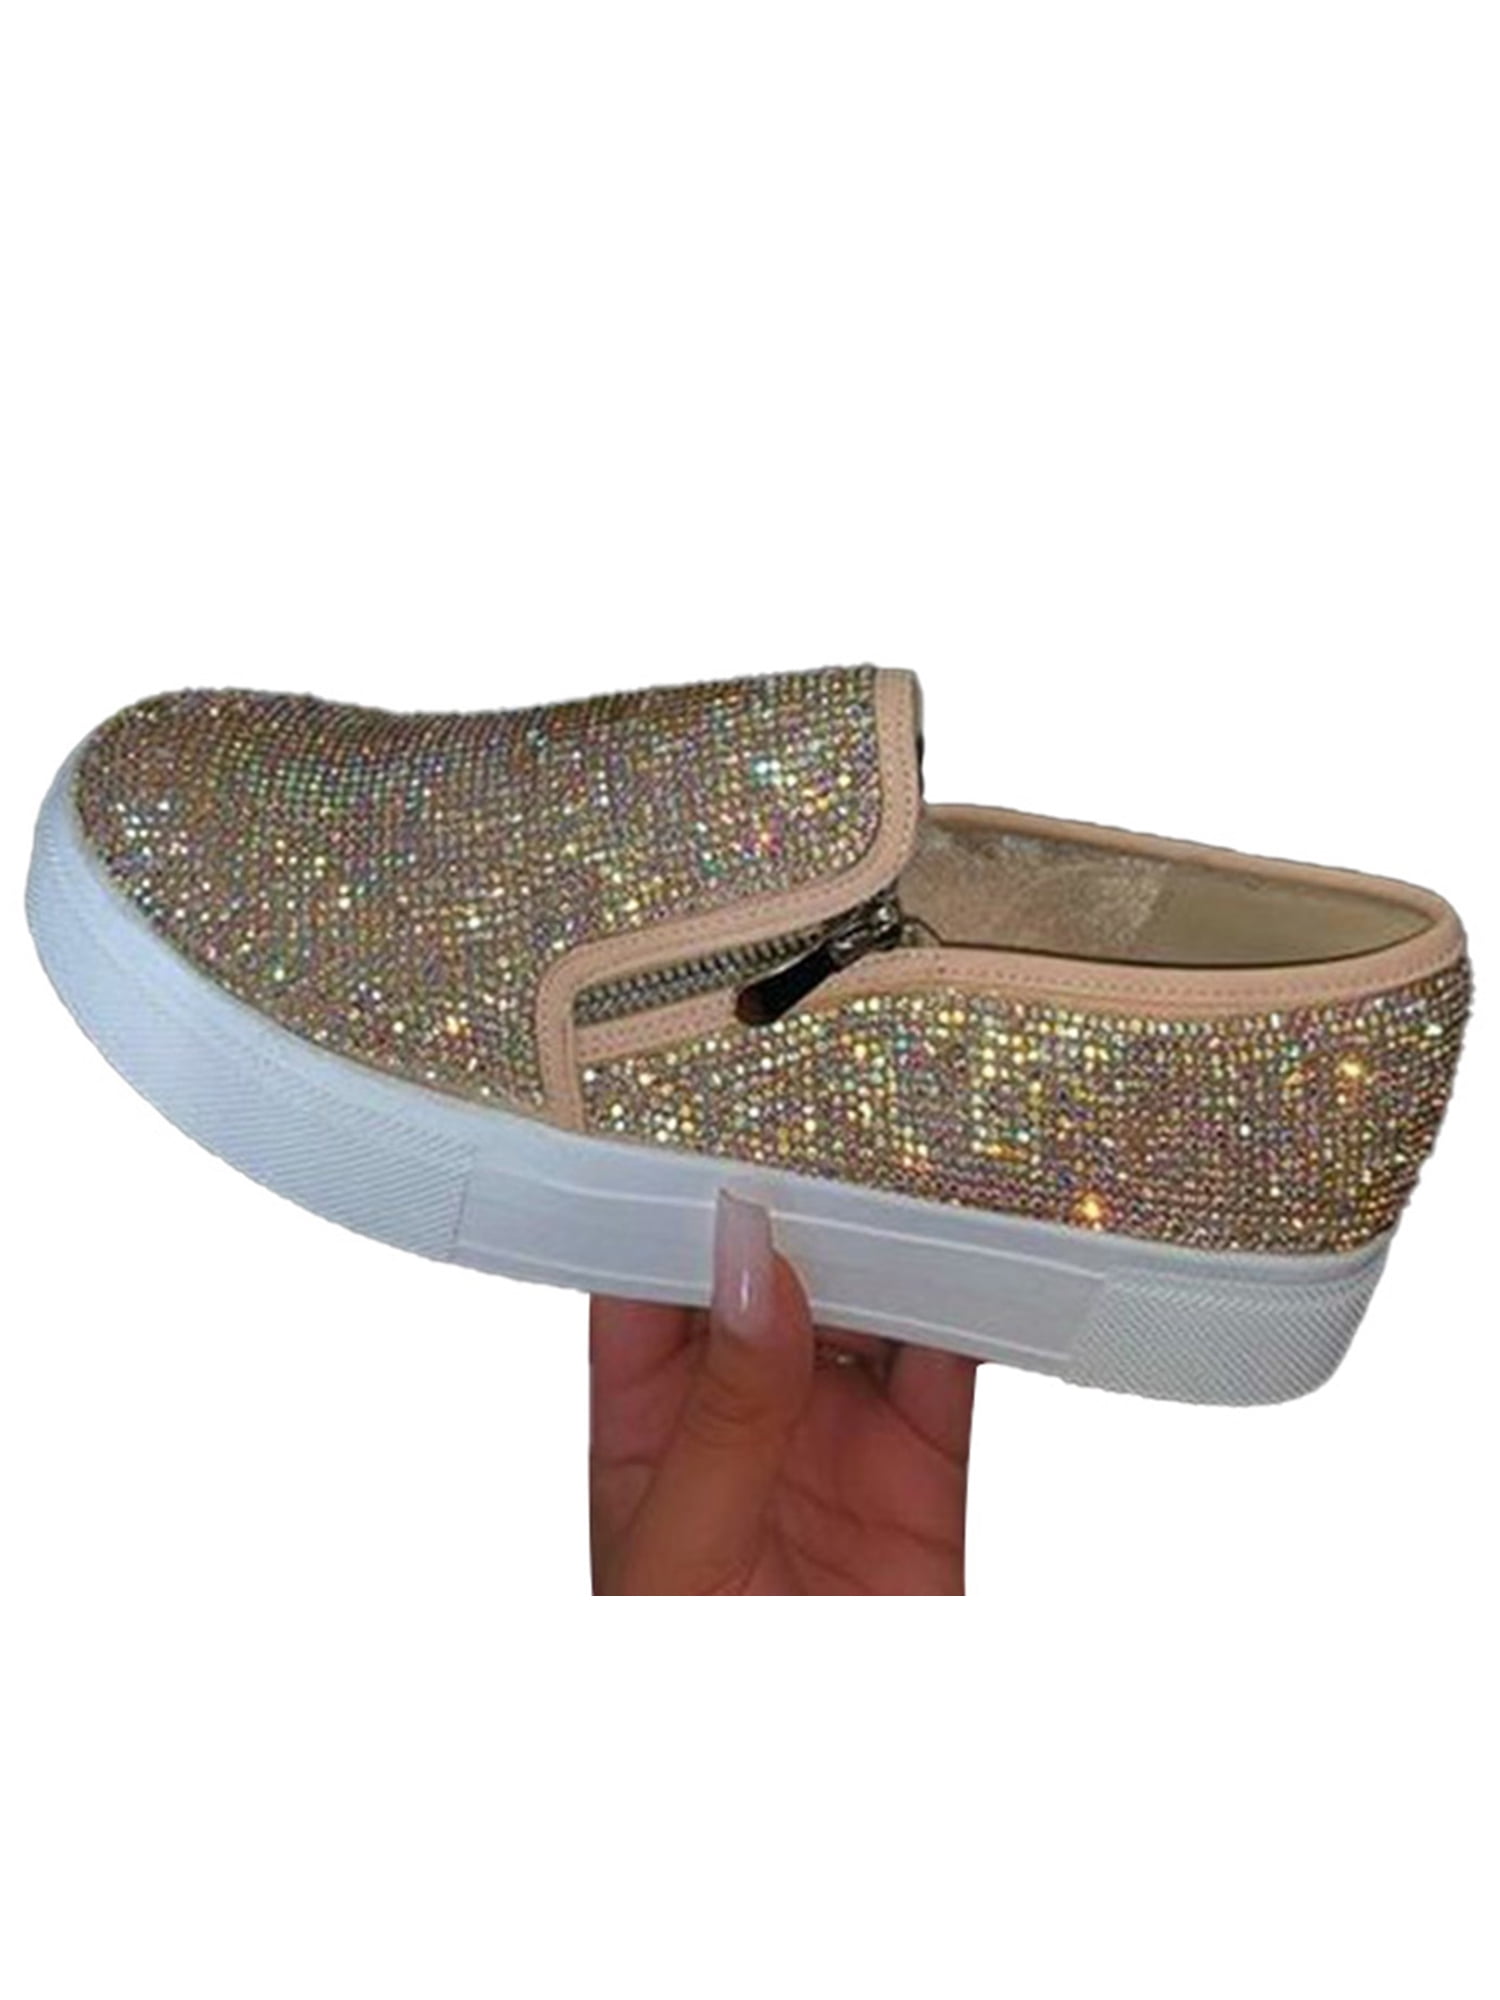 Womens Round Toe Flat Glitter Casual Platform Slip on Loafer Bling Sequins Shoes 